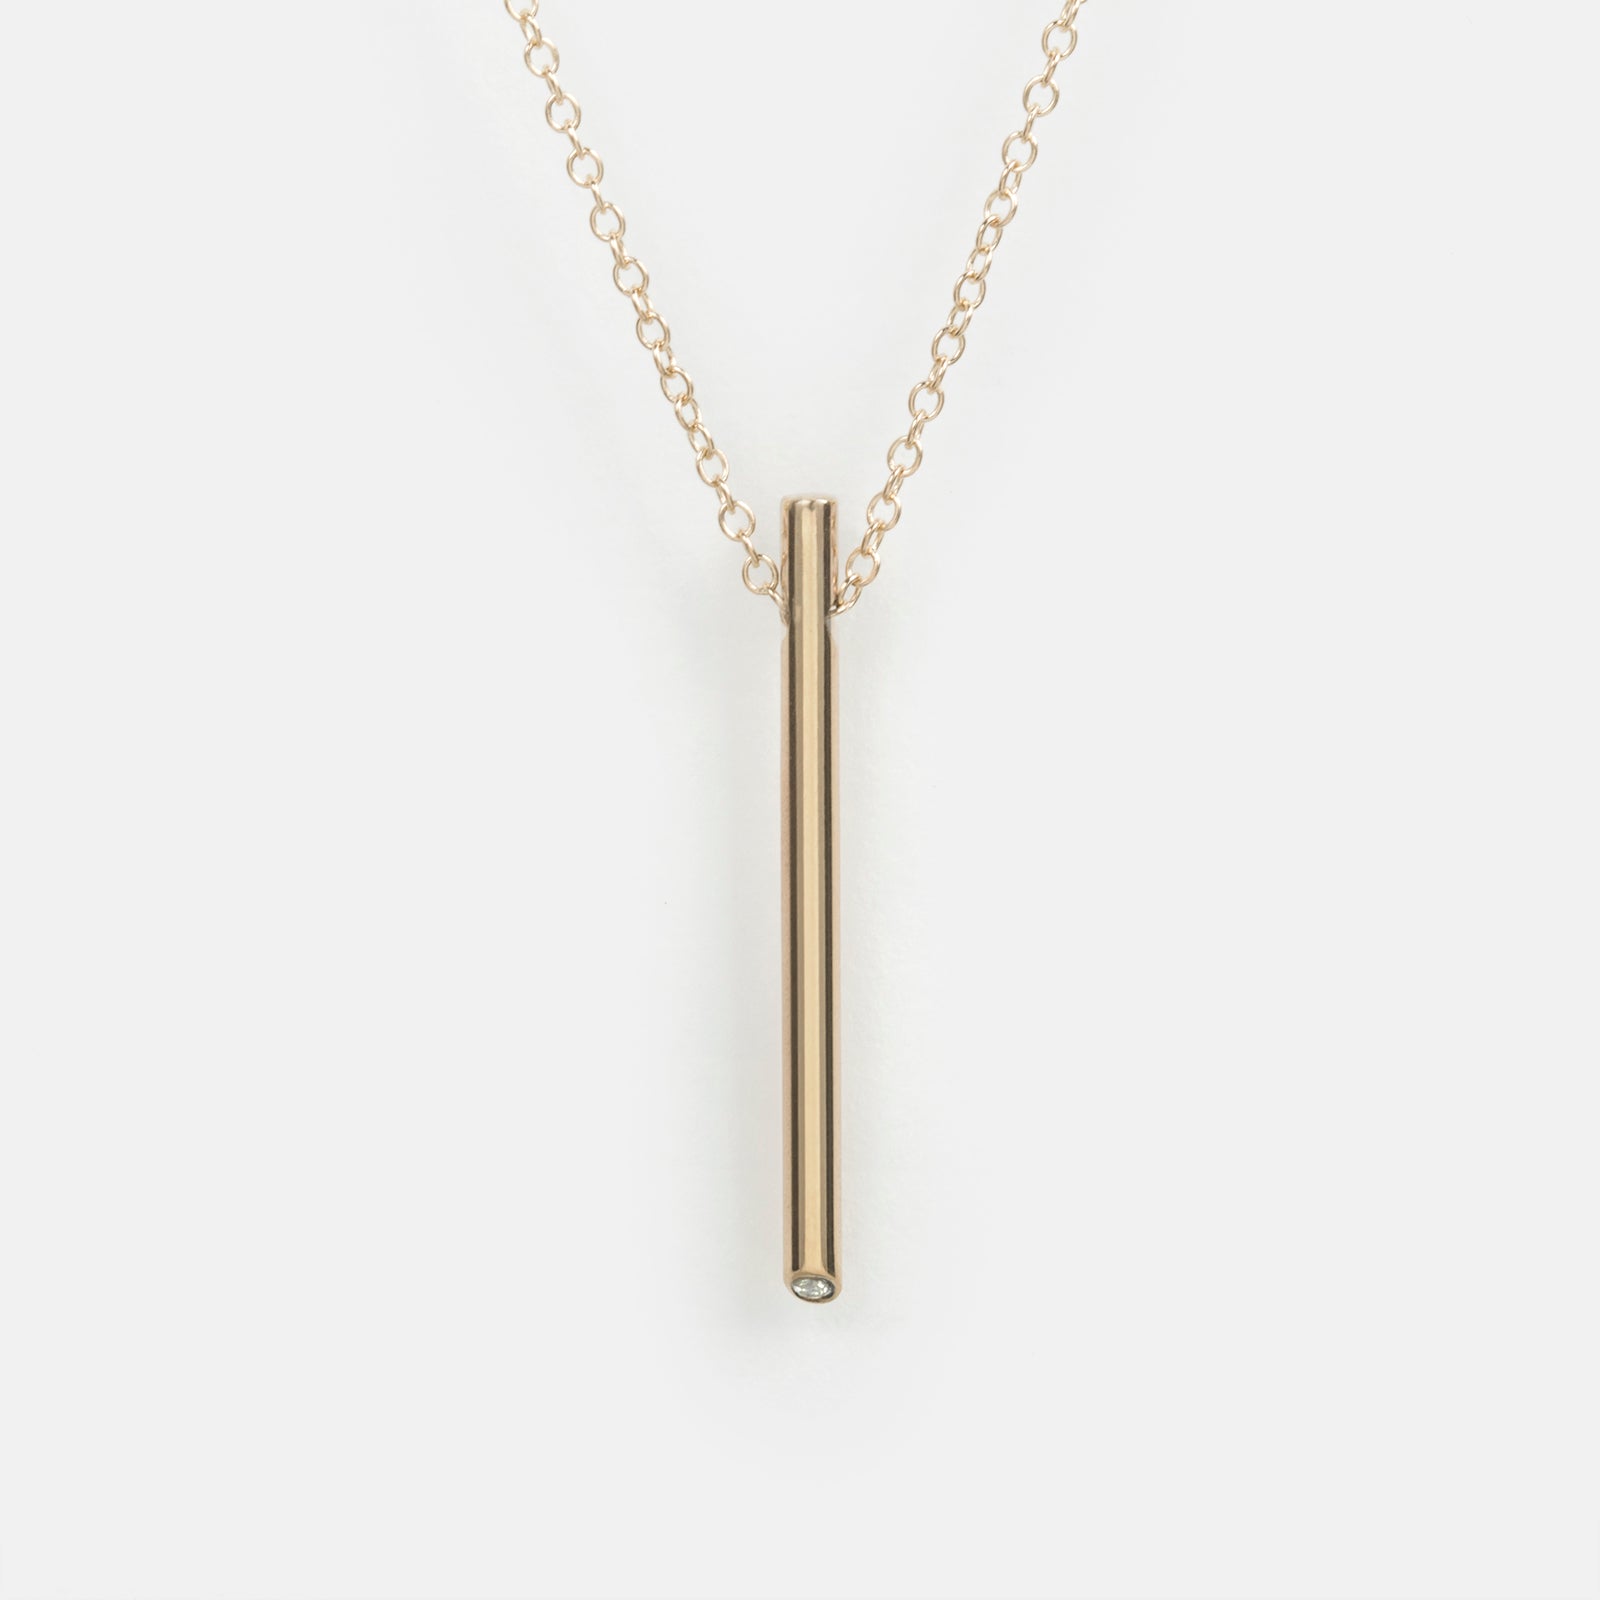 Ossu Simple Necklace in 14k Gold set with White Diamonds By SHW Fine Jewelry New York City